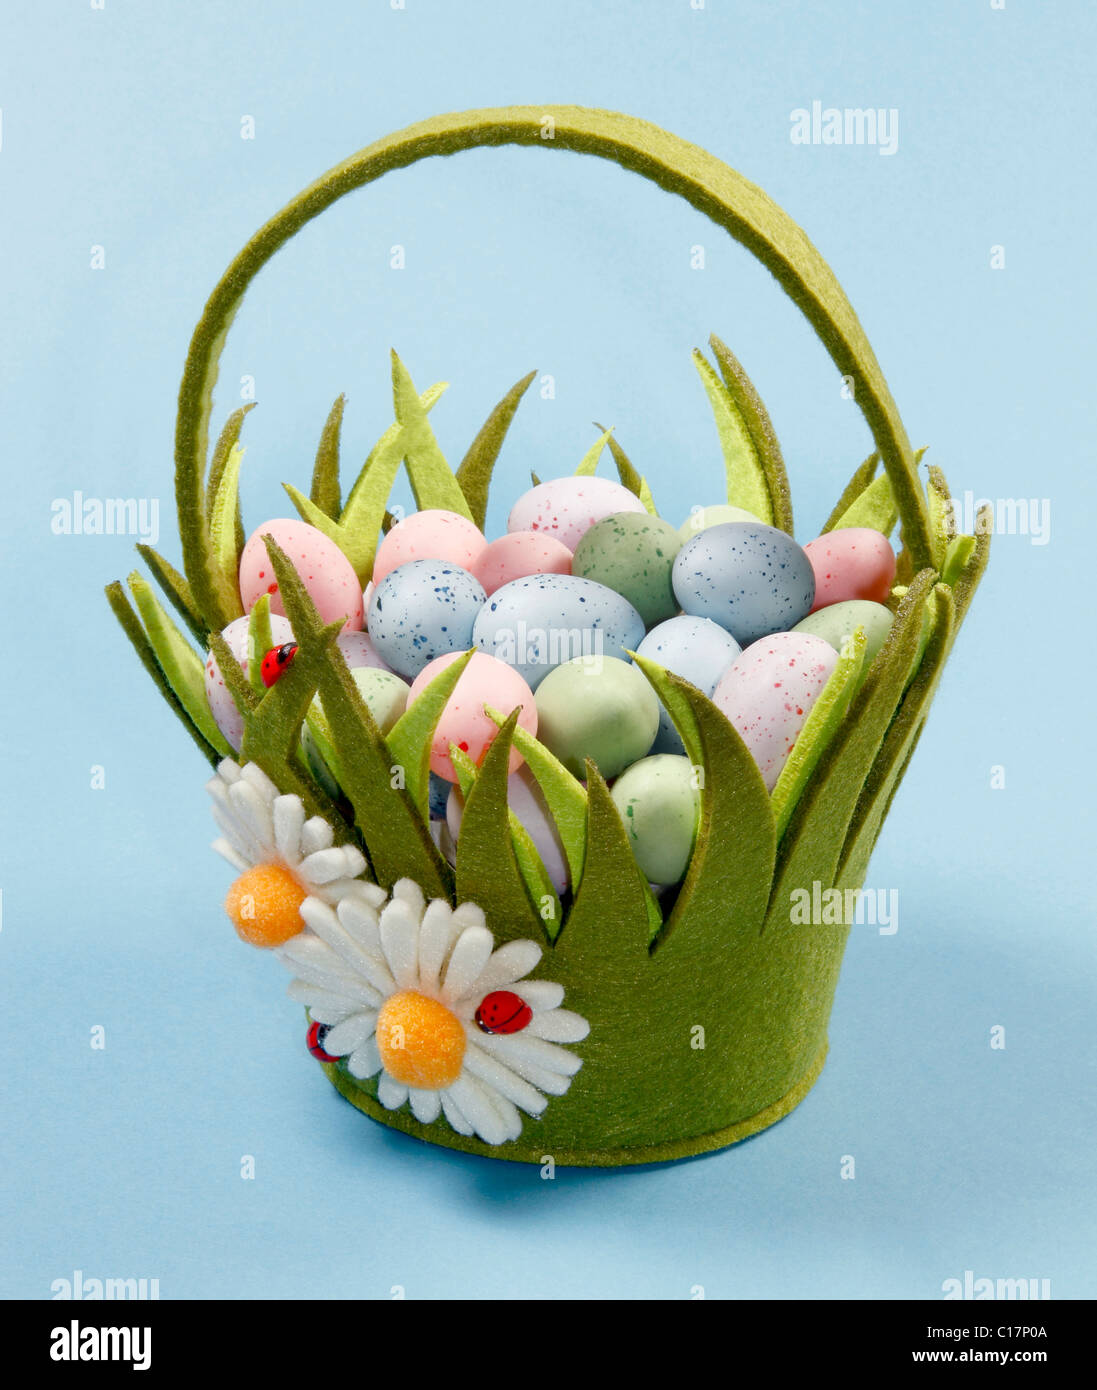 Green Easter Basket with Eggs on Blue Background. Stock Photo